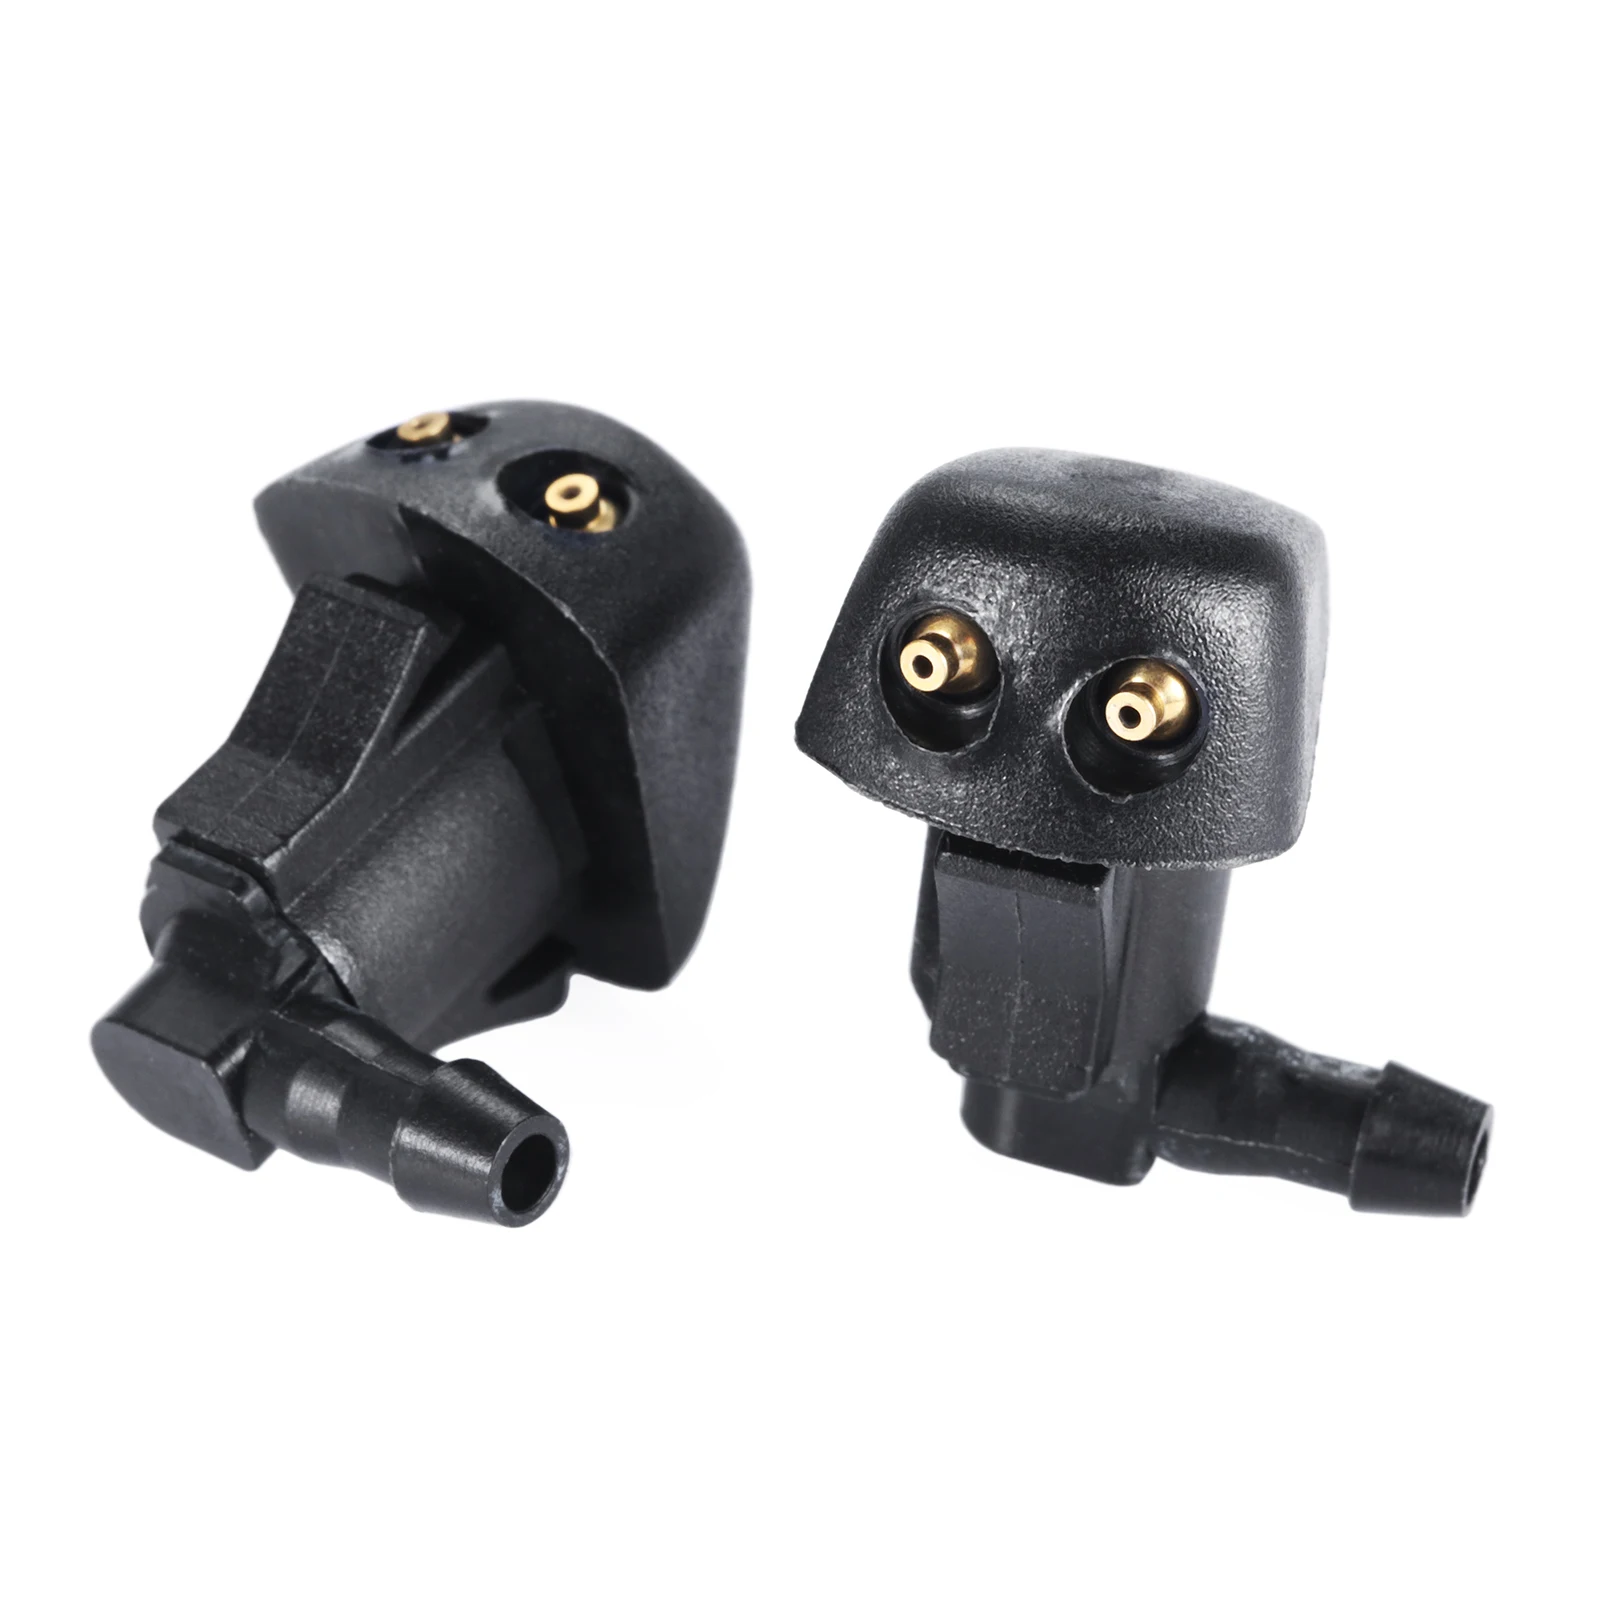 2Pcs Front Windshield Wiper Washer Jet Fluid Nozzle for Mazda 3 MK1 2003-09 5 - £10.76 GBP